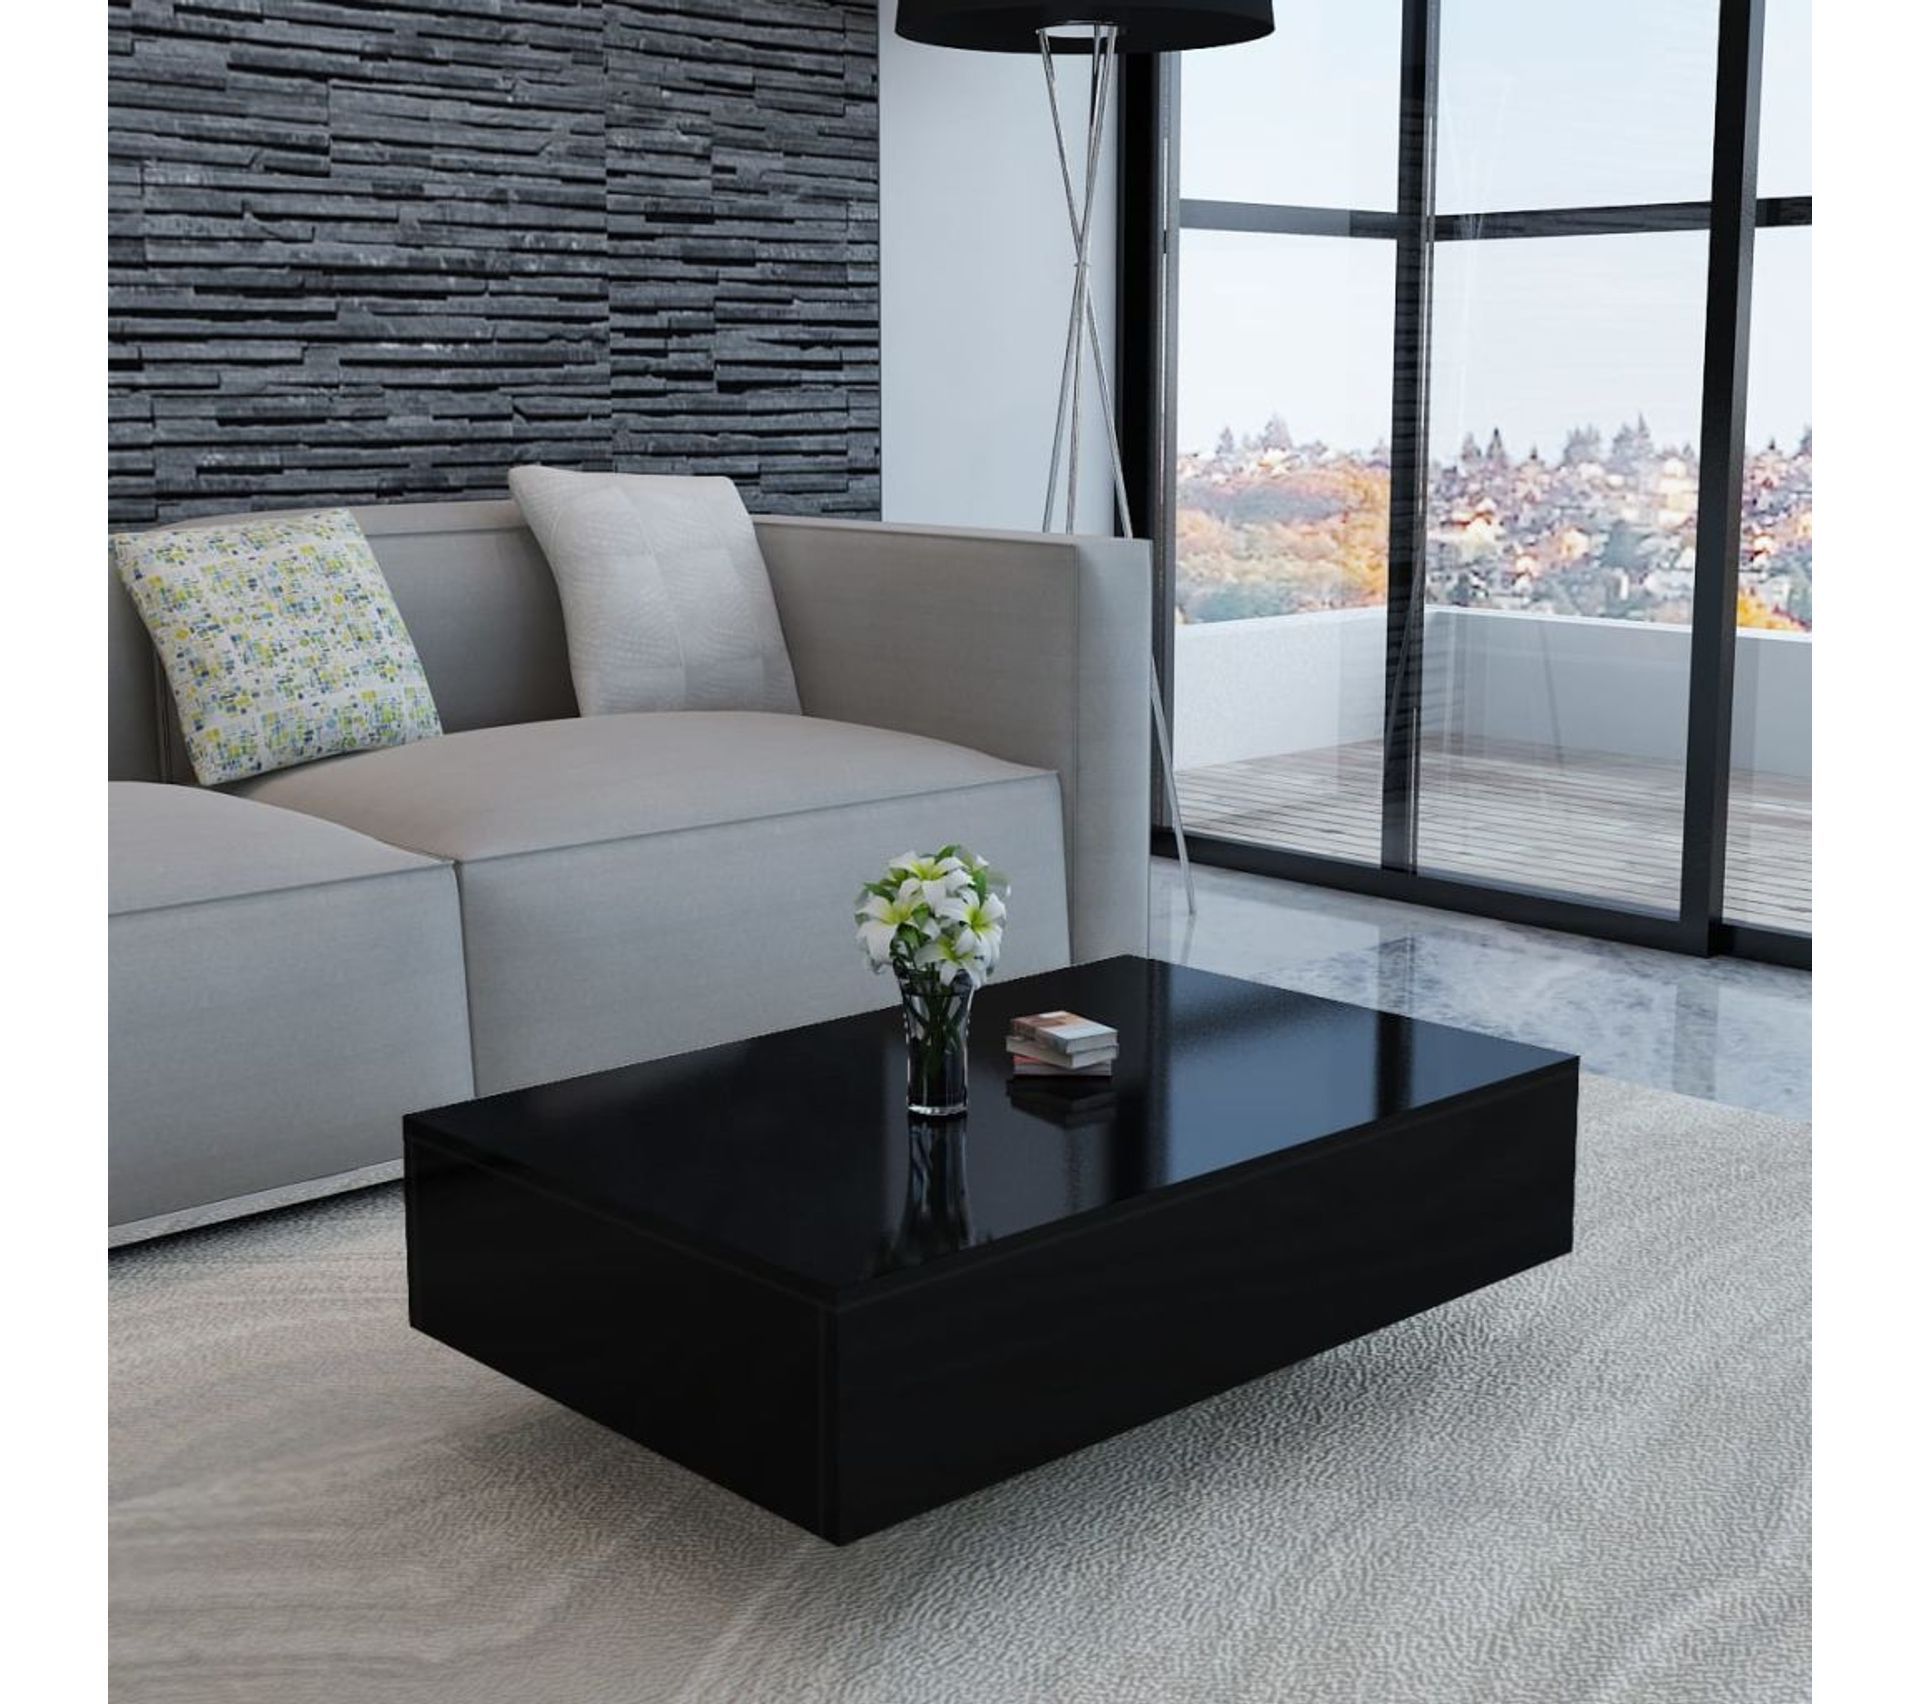 High Gloss Black Coffee Tables Intended For Best And Newest Table Basse Haute Brillance Noir – Table Basse But (View 9 of 10)